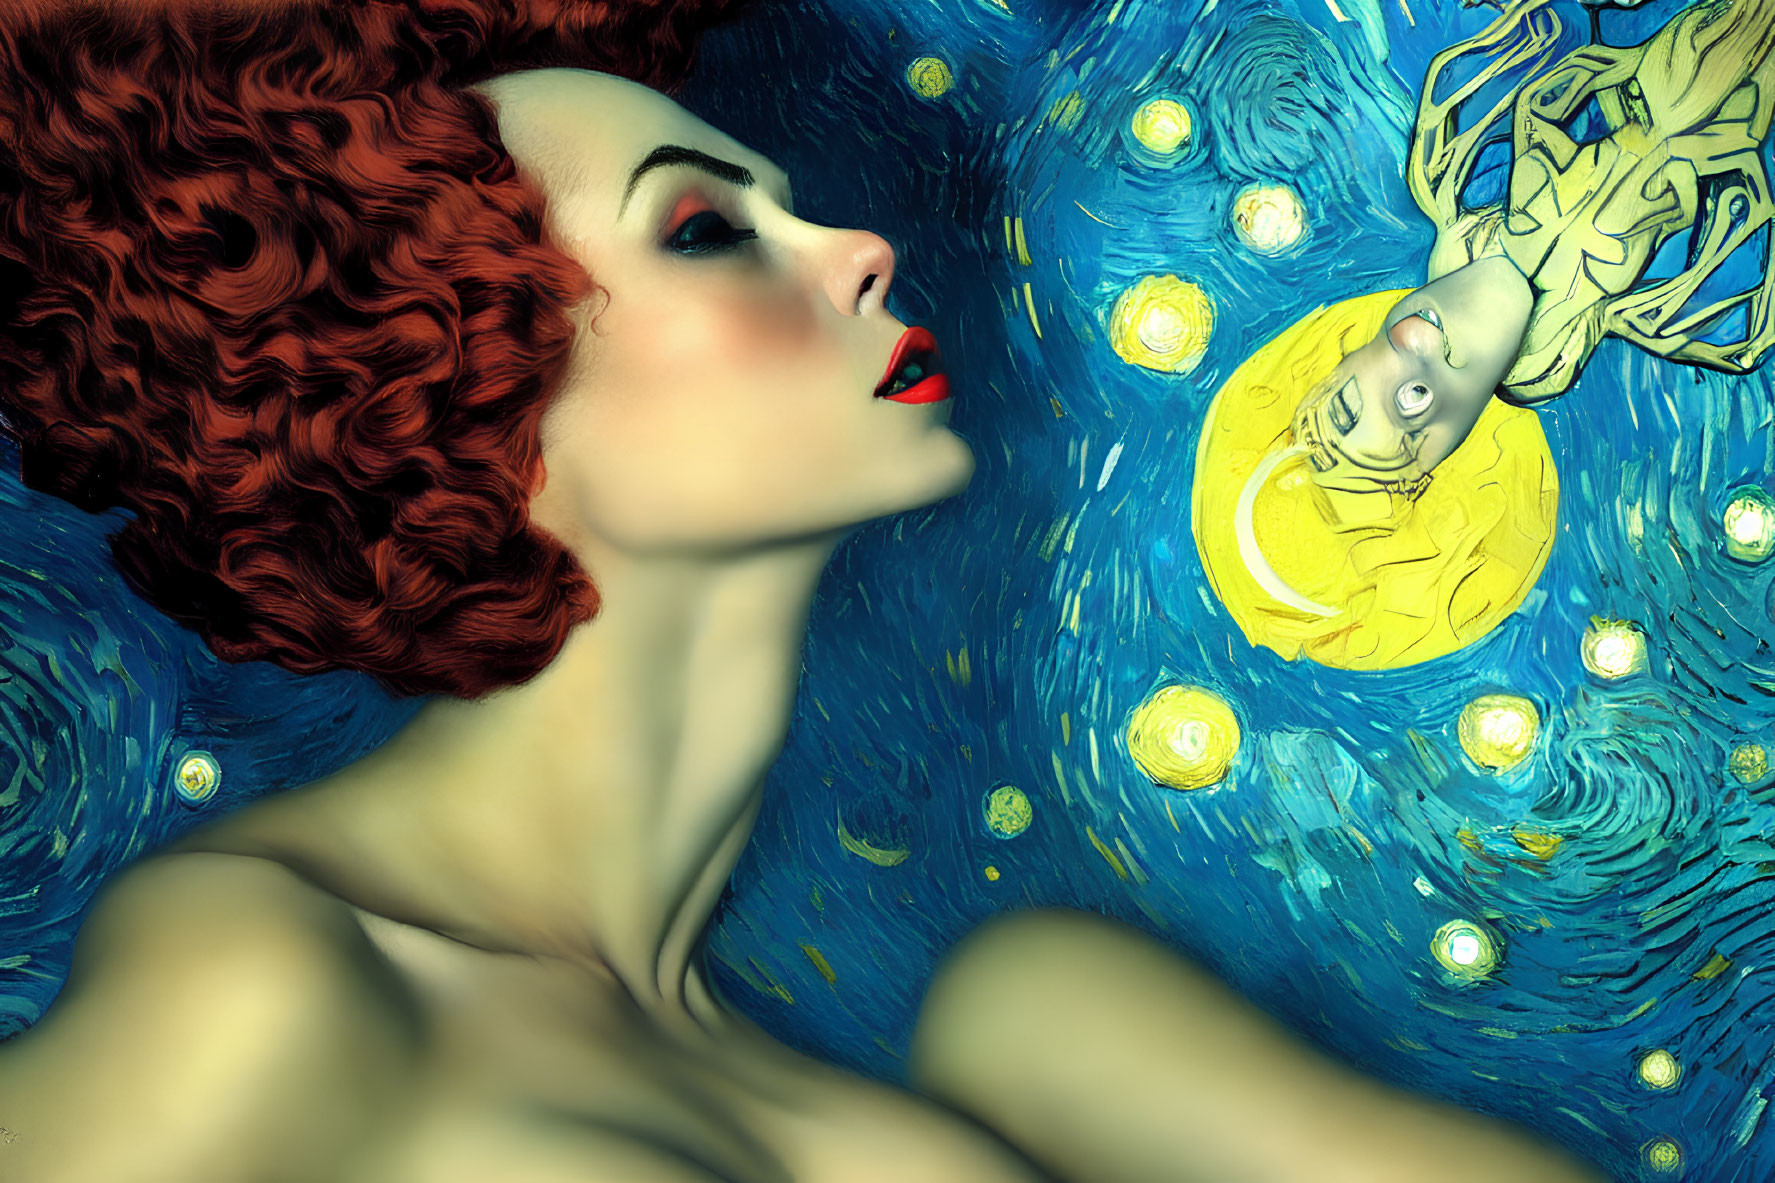 Vibrant red-haired woman against swirling blue background with yellow haloed figure